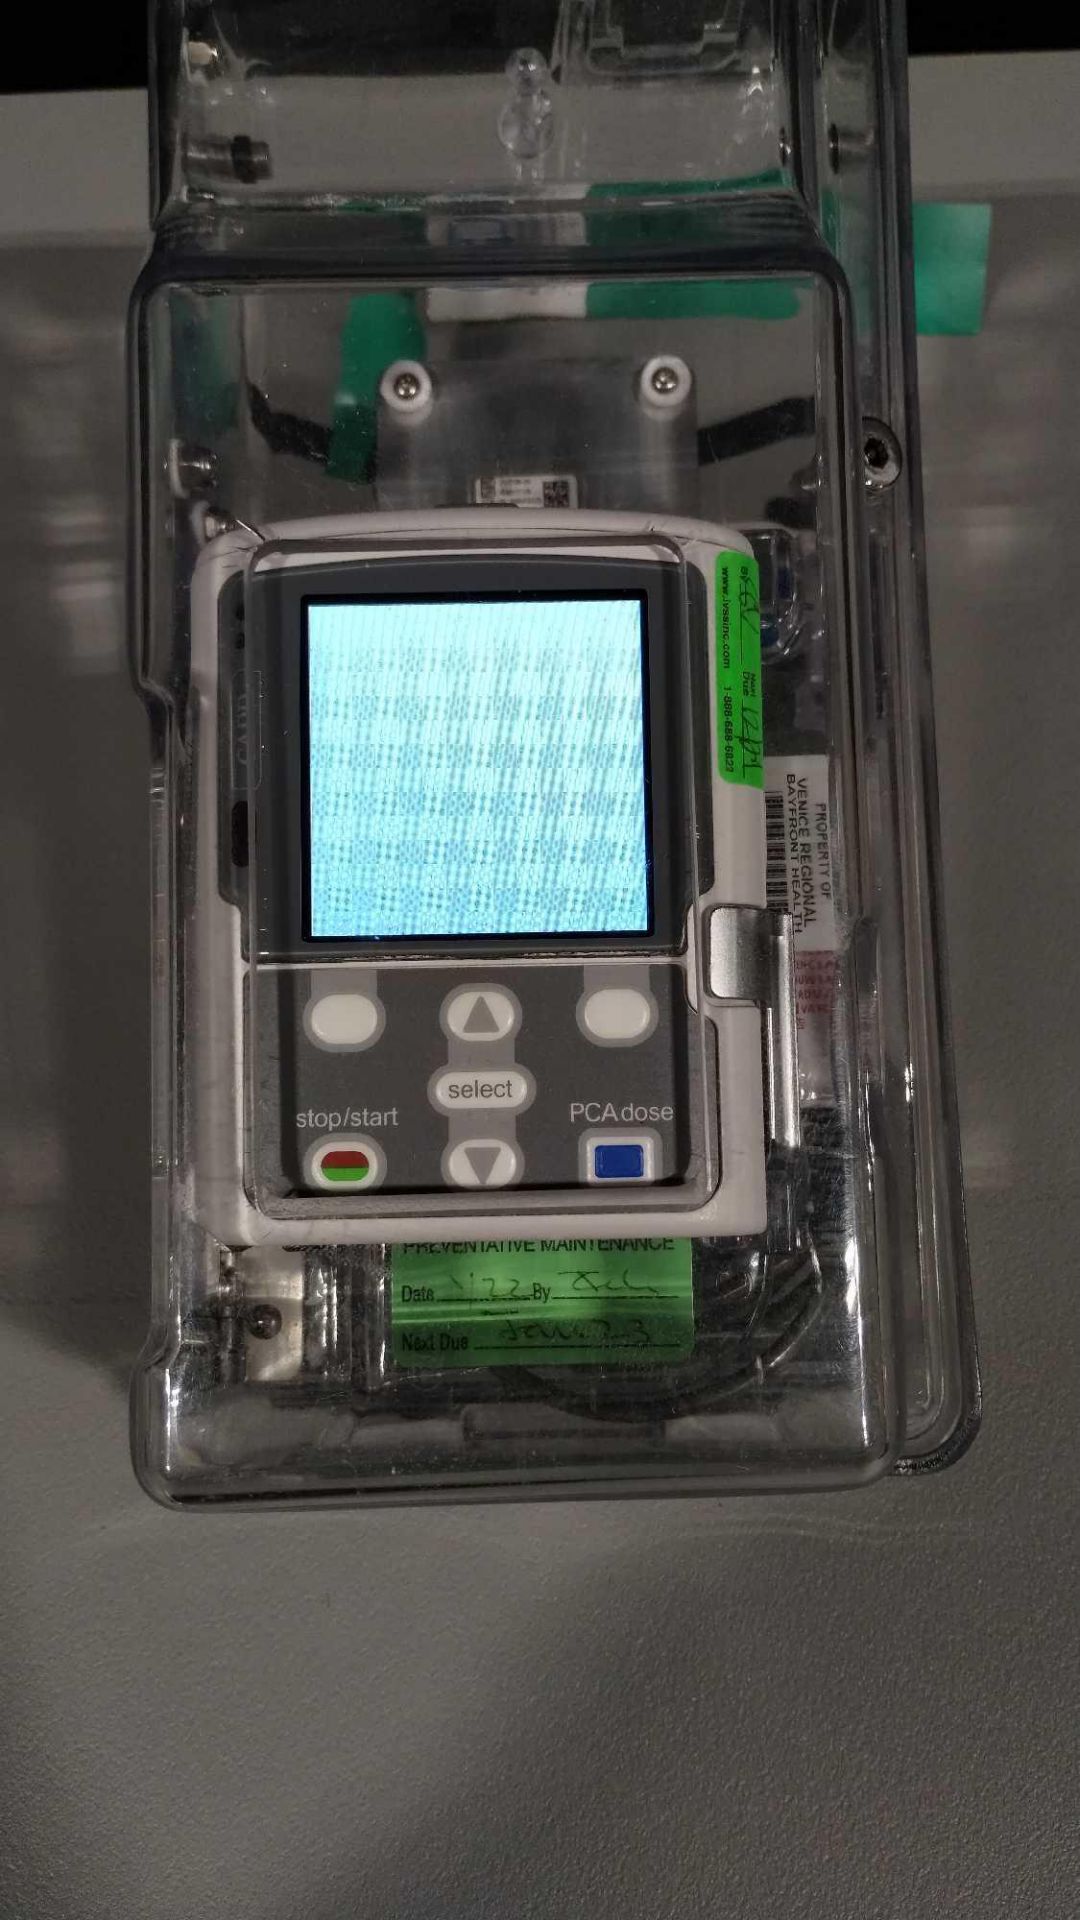 SMITHS MEDICAL CADD 2110 INFUSION PUMP